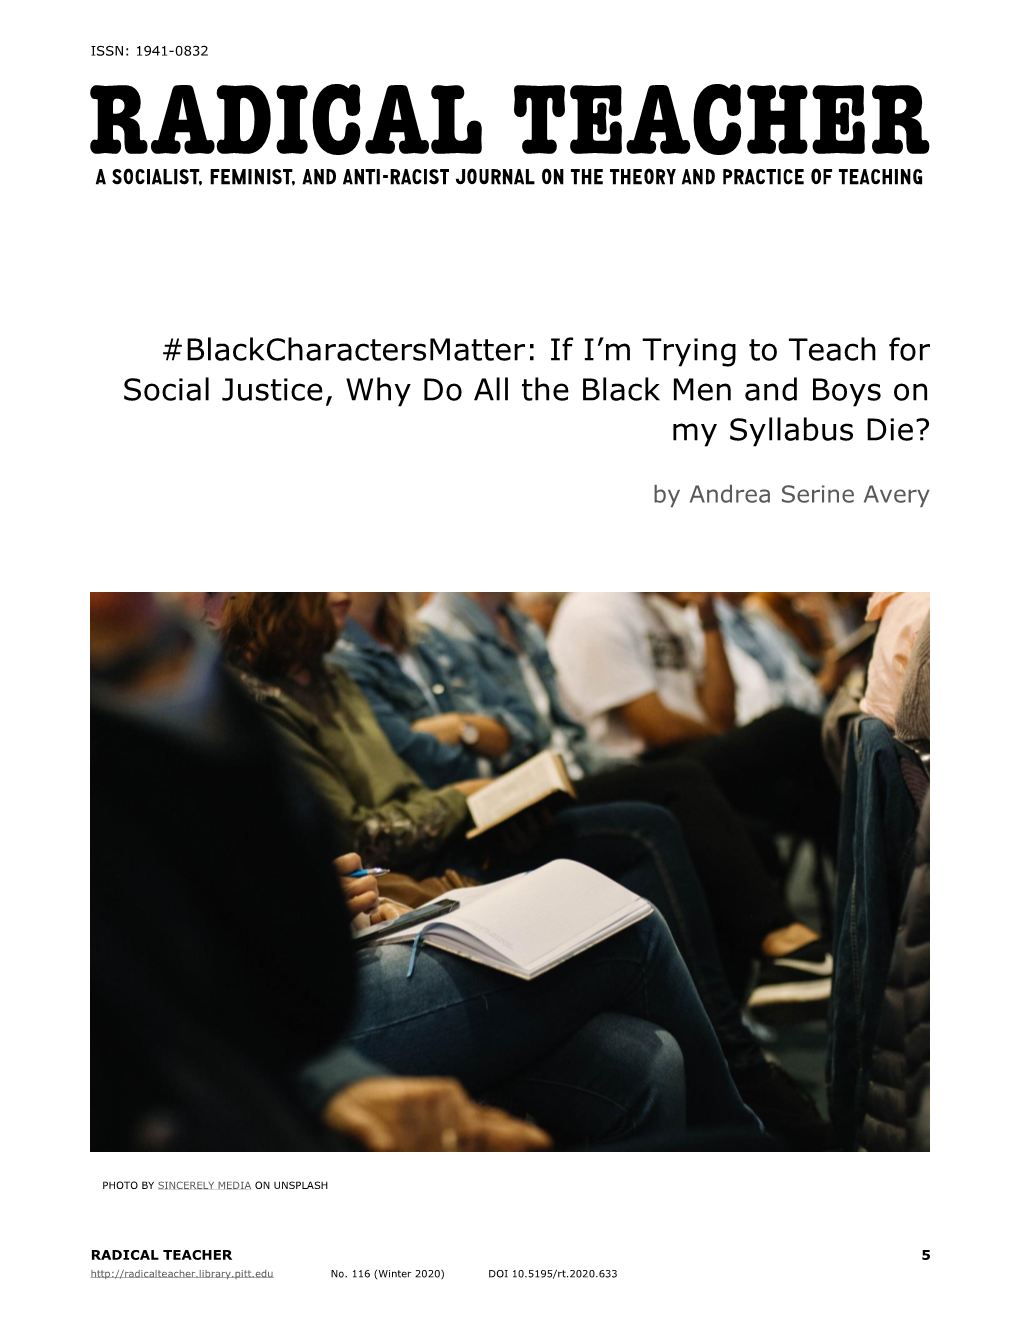 If I'm Trying to Teach for Social Justice, Why Do All the Black Men